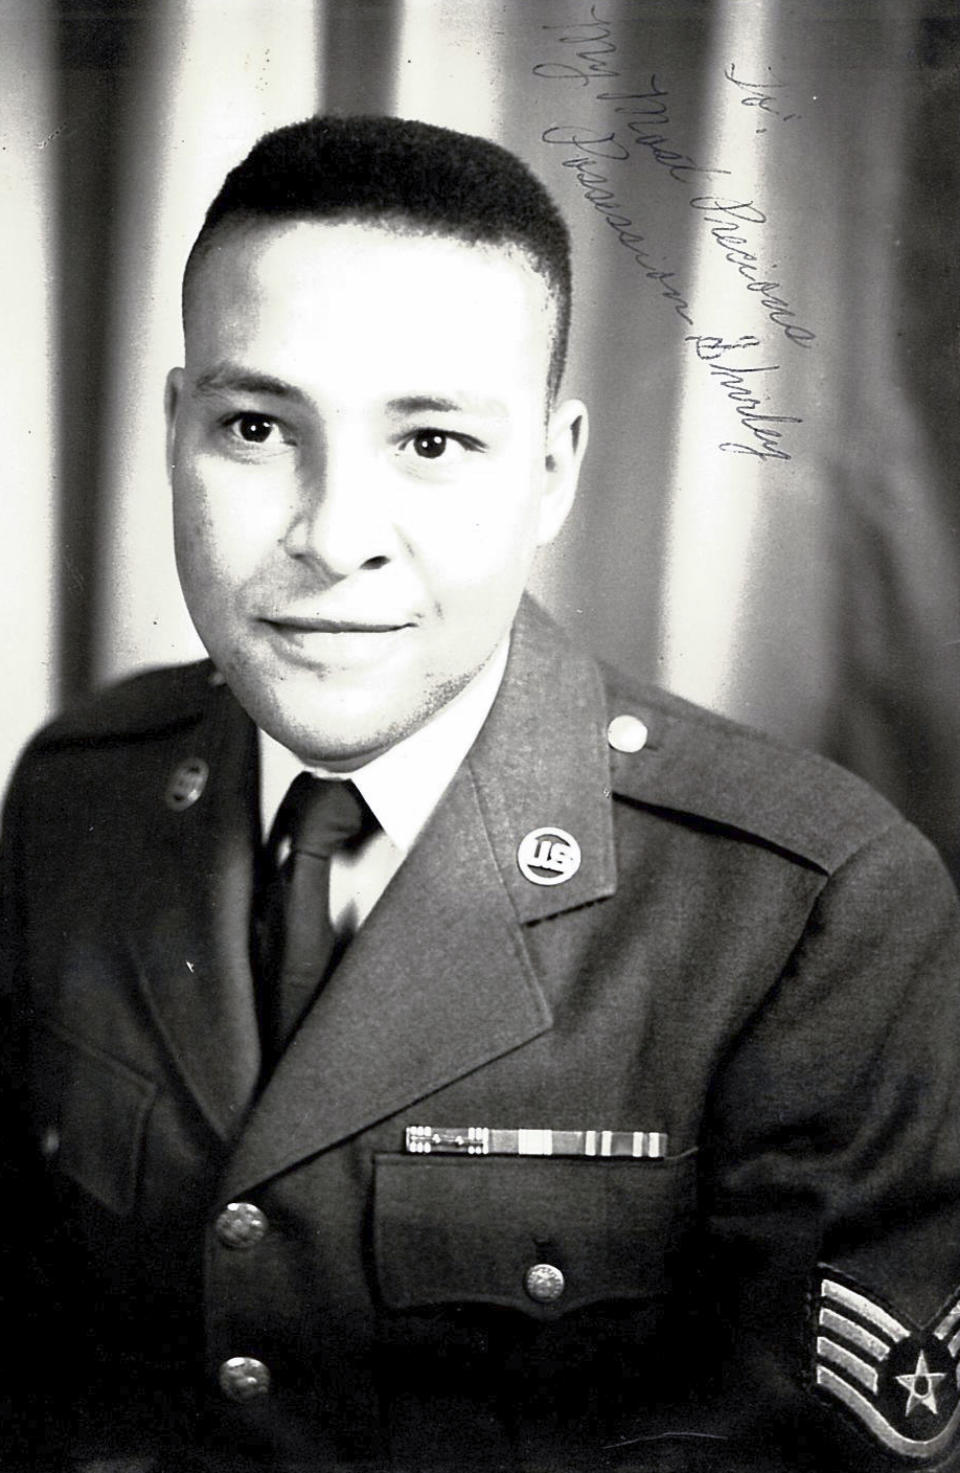 This photo provided by Gary Fields shows his father Staff Sgt. Willie "Bill" Mount Jr., who served in the 87th Air Force squadron, which flew the McDonnell F101B Voodoo out of Clinton County Air Force Base in Wilmington, Ohio. The squadron’s job was to intercept Russian bombers loaded with nuclear bombs if they tried to attack the United States. (AP Photo)